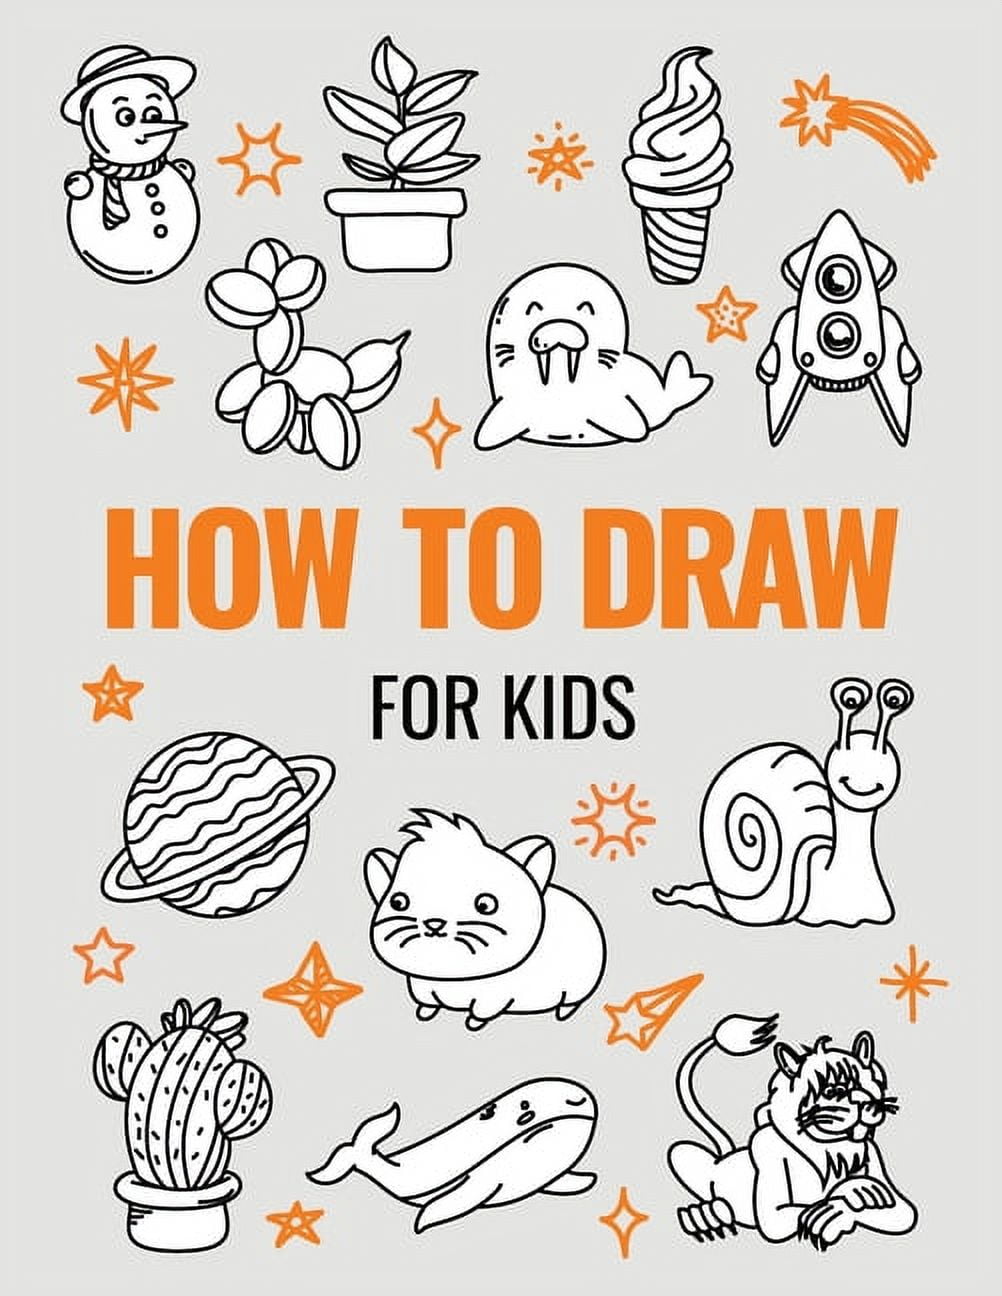 How To Draw 101 Things For Kids: Drawing Book With Animals, Cars, Foods,:  With 4 Level Easy/Meduim/Hard/Extreme